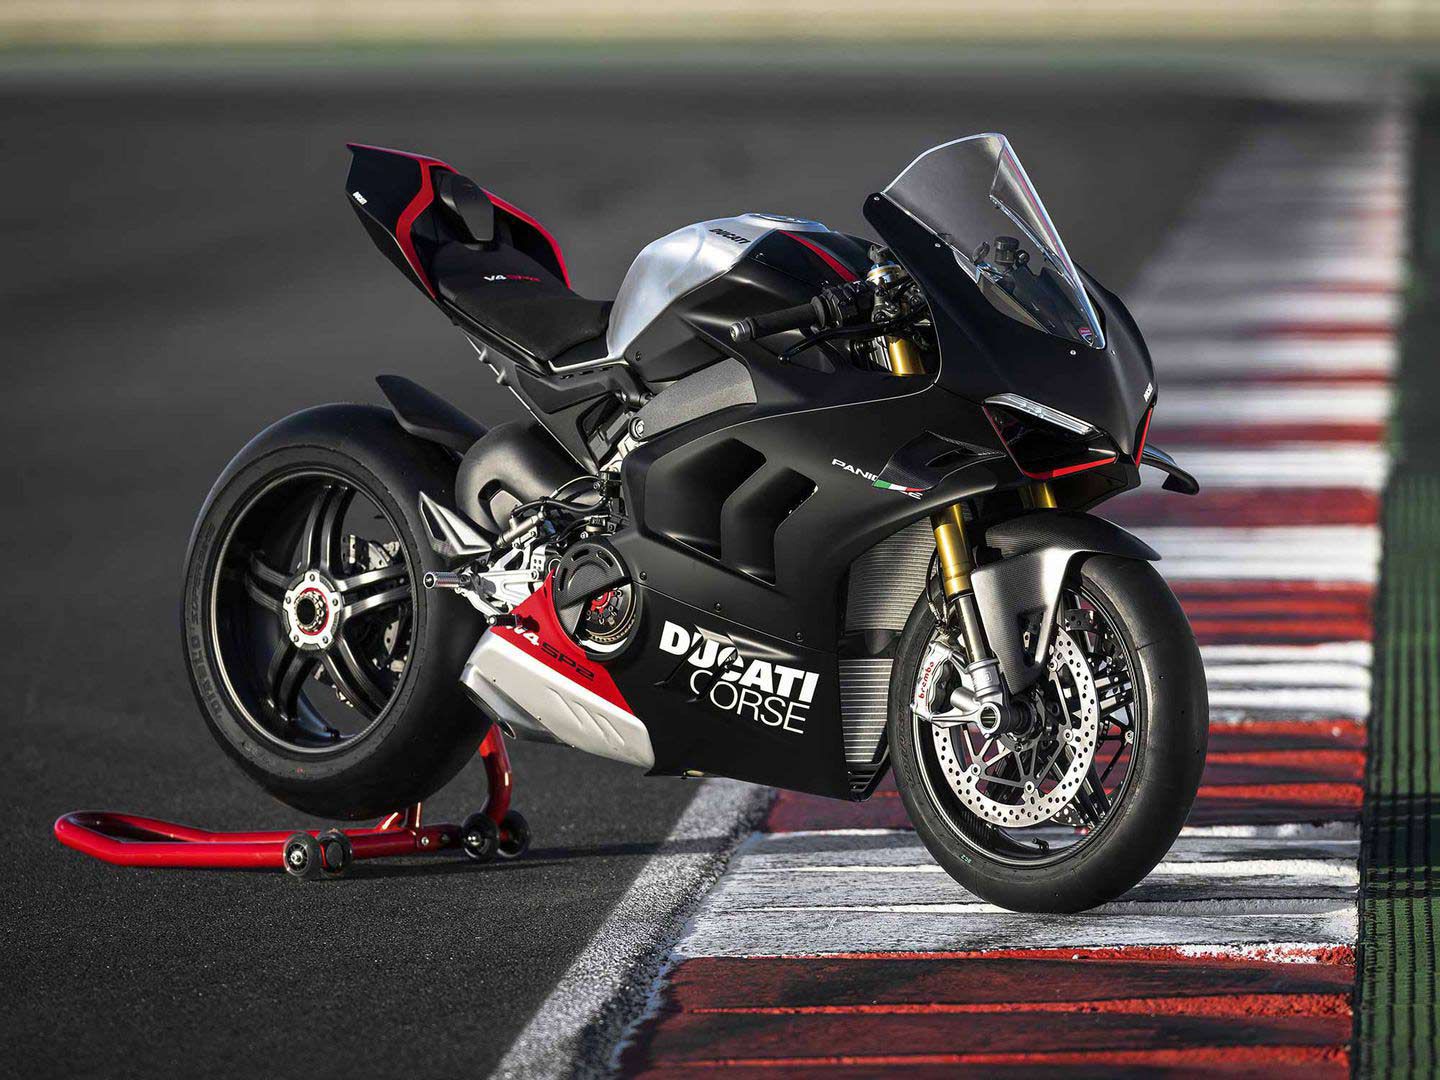 The V4 SP2 from Ducati is a phenomenal track weapon.